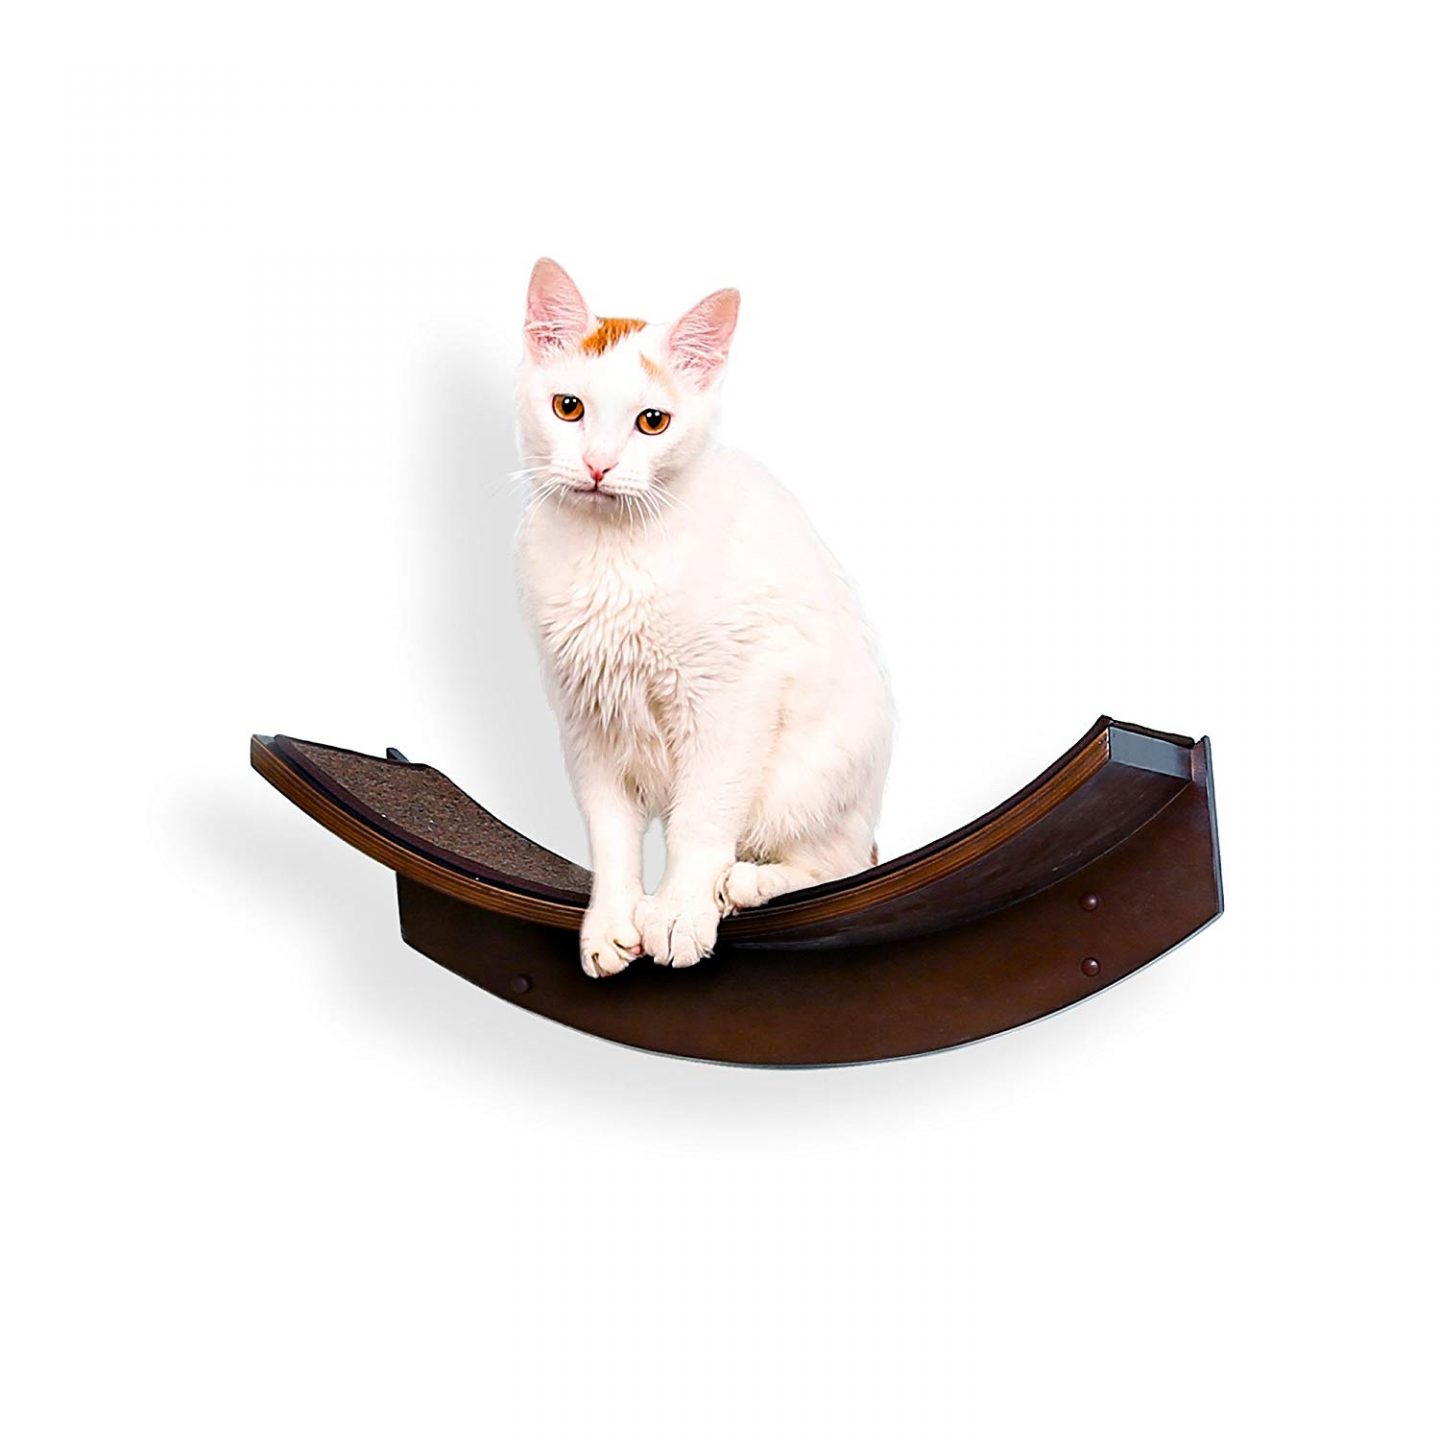 Curved Mahogany Cat Shelf With Replaceable Carpet - Looking for the best shelving for cats?  This wall mounted cat perch has real CLASS! Great for large cats & small spaces. 